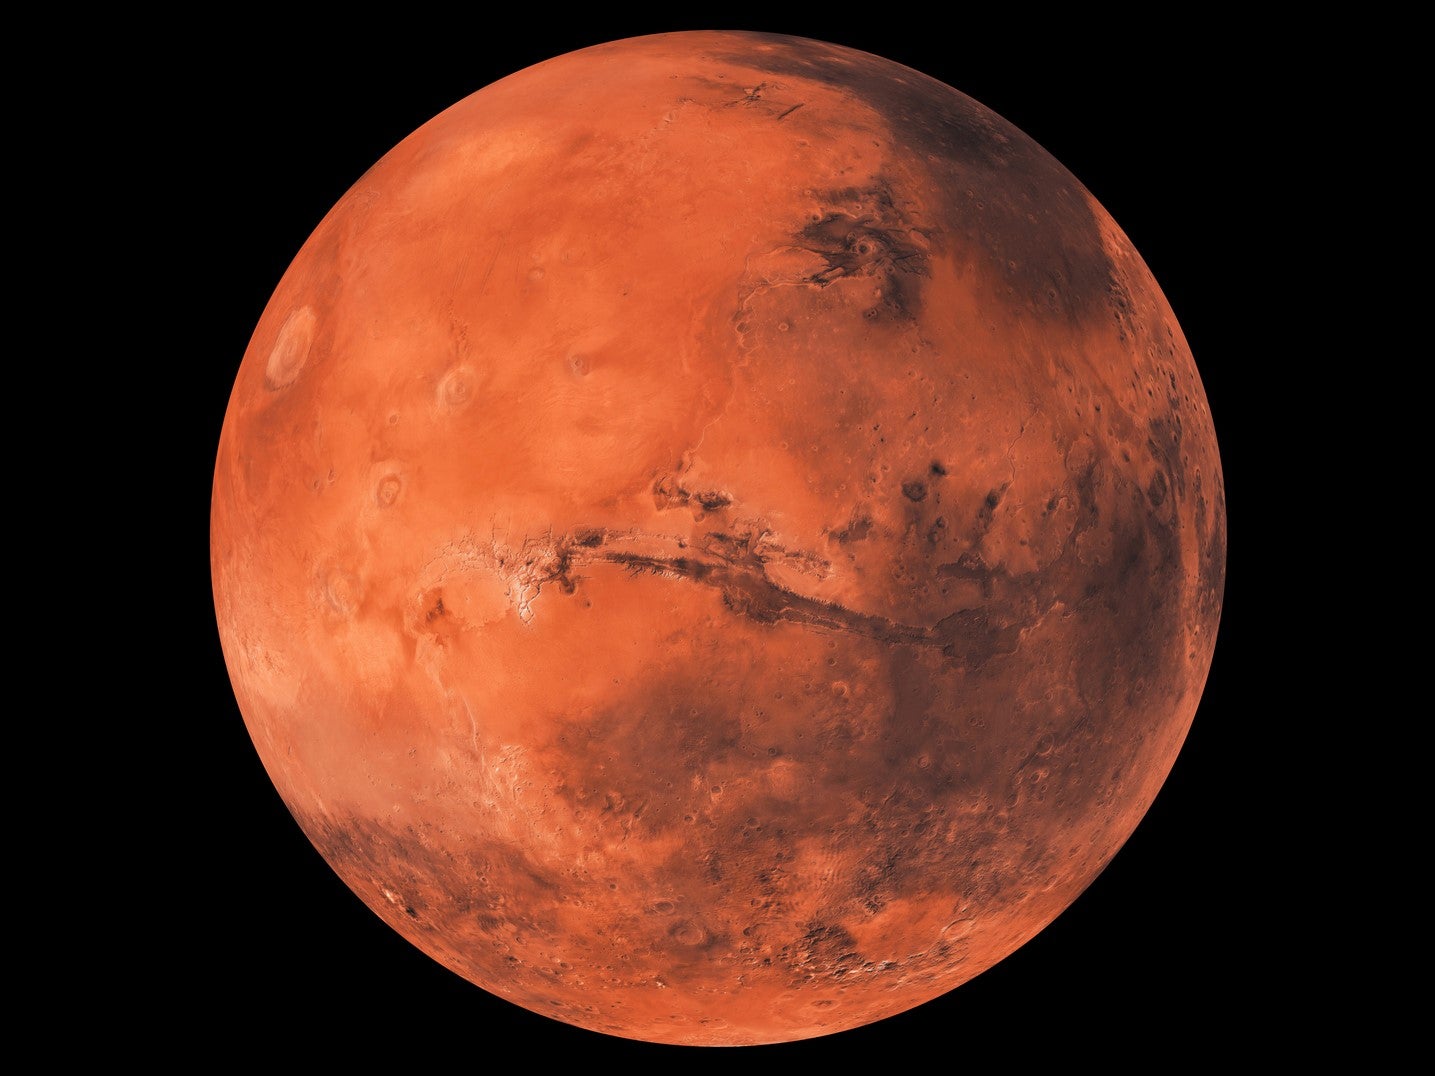 Mars will appear bigger and brighter in the sky in October